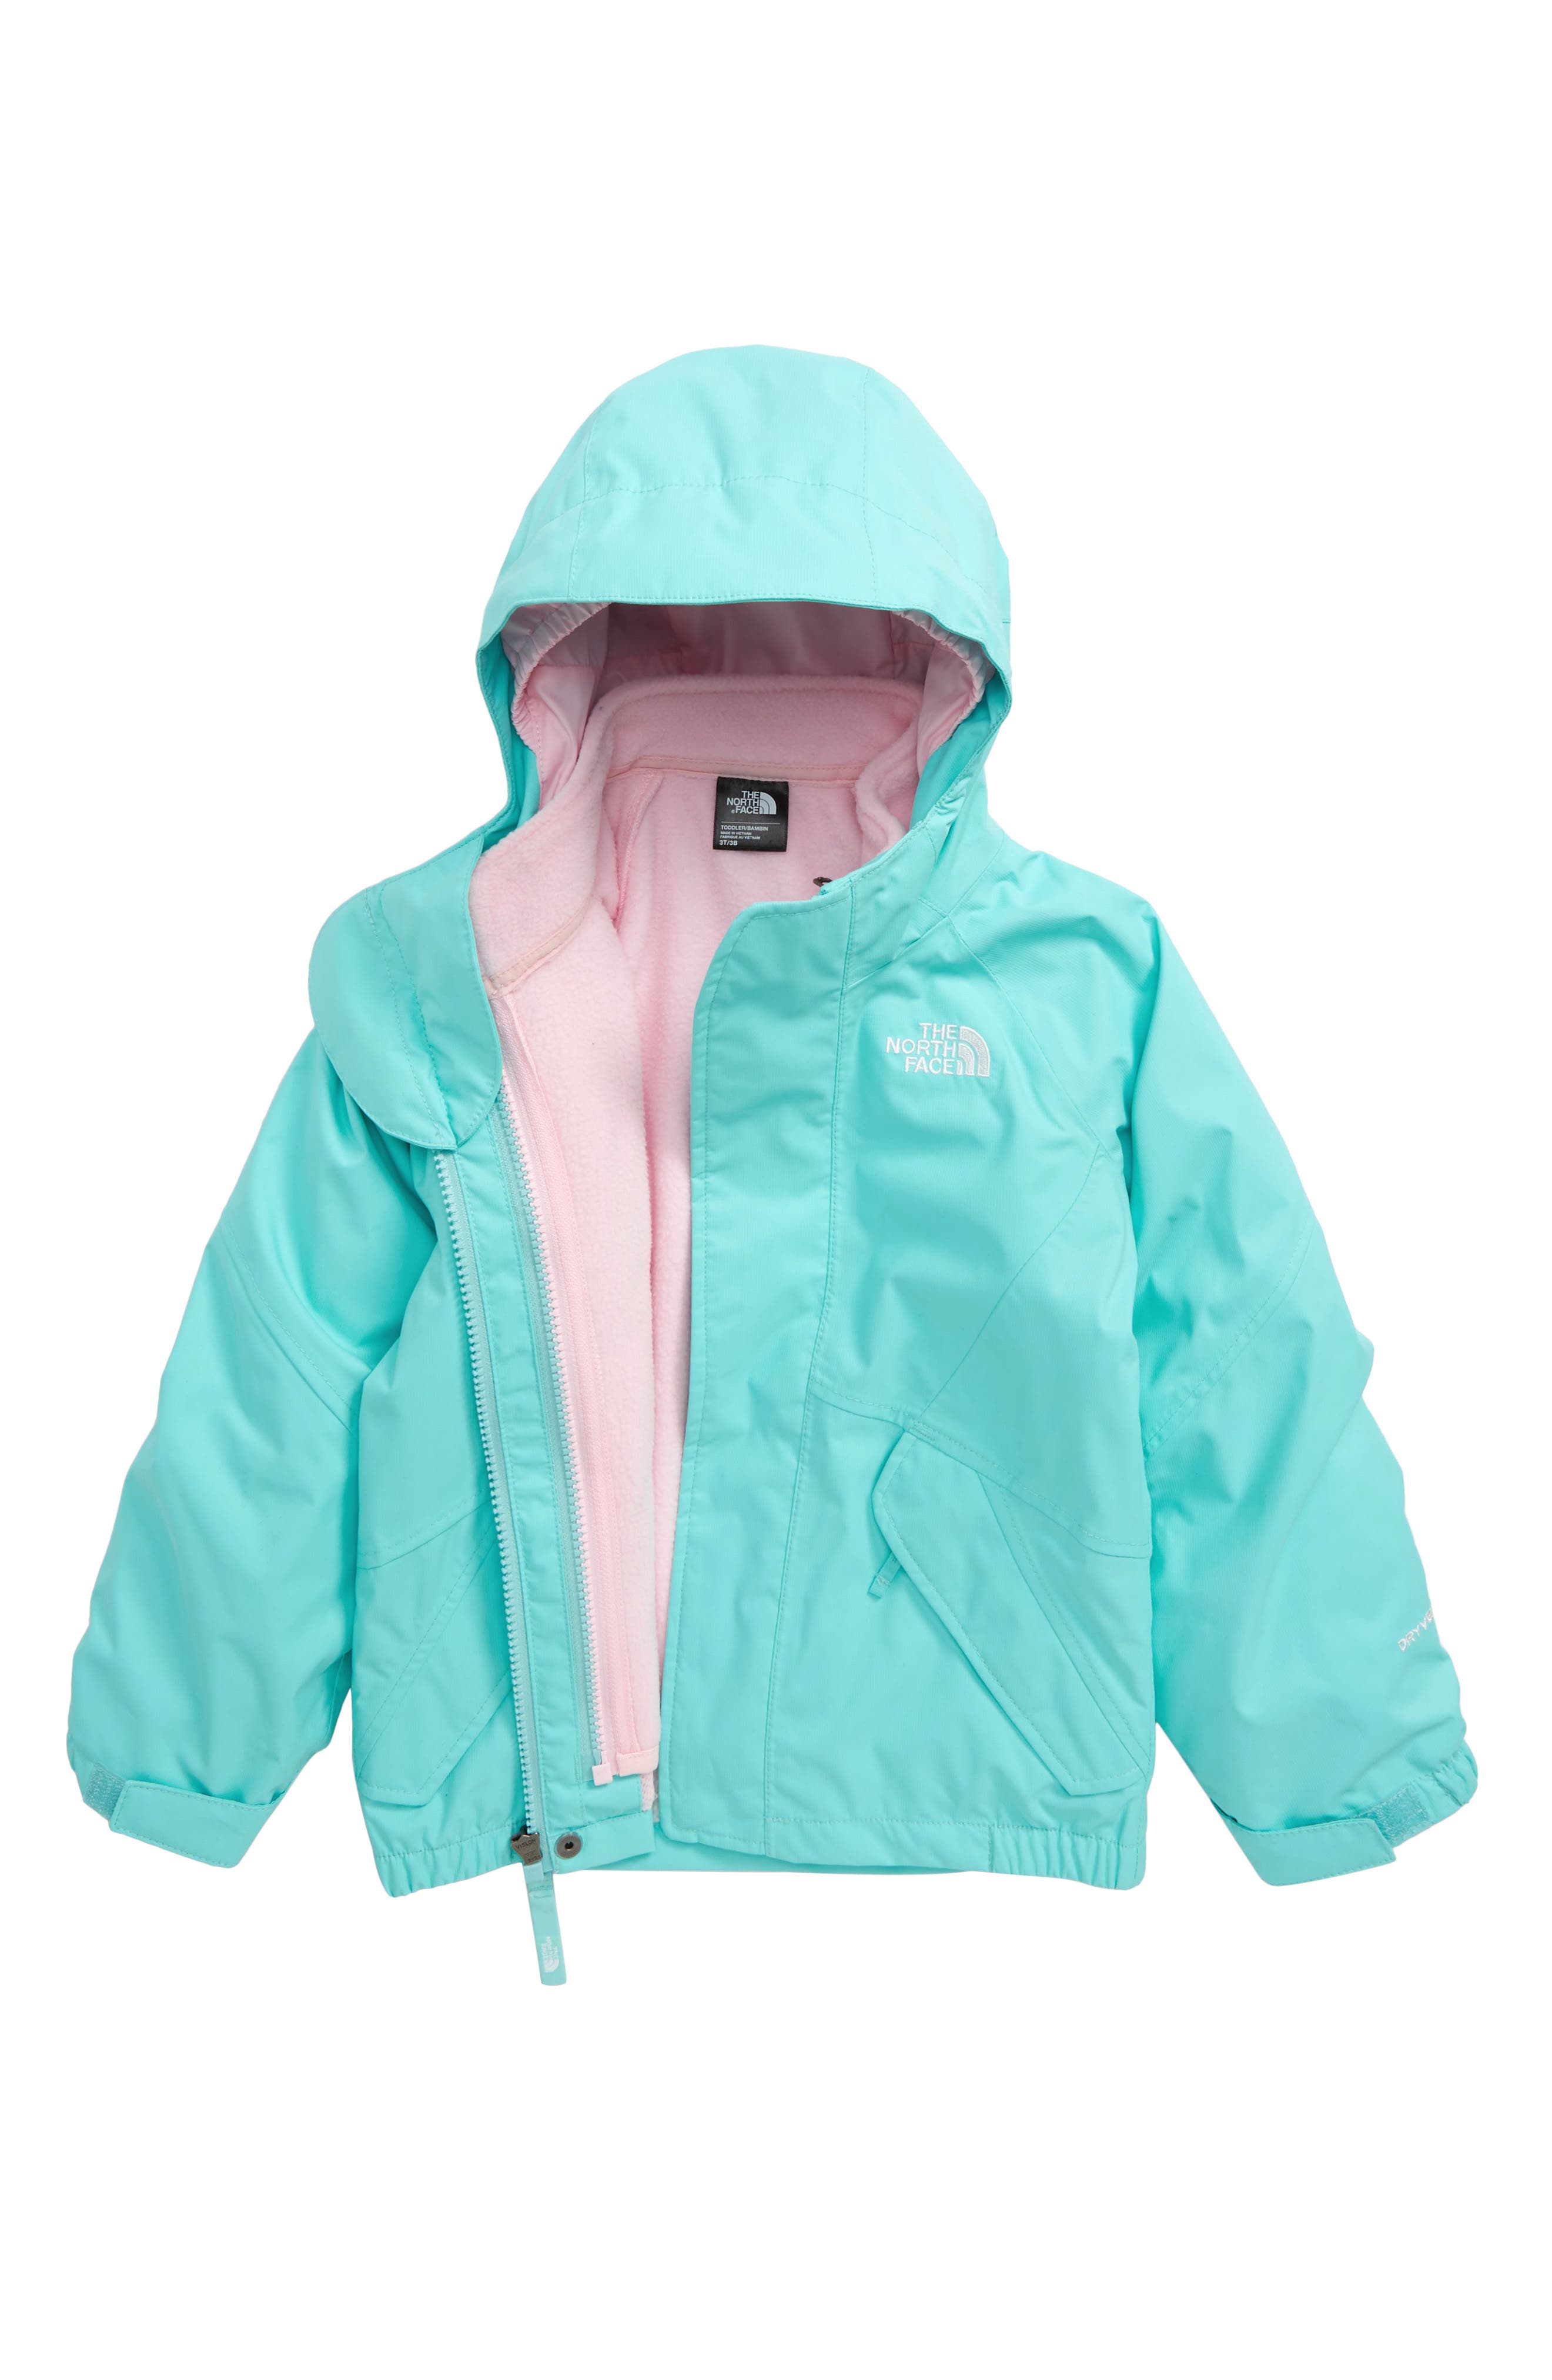 north face kira triclimate toddler